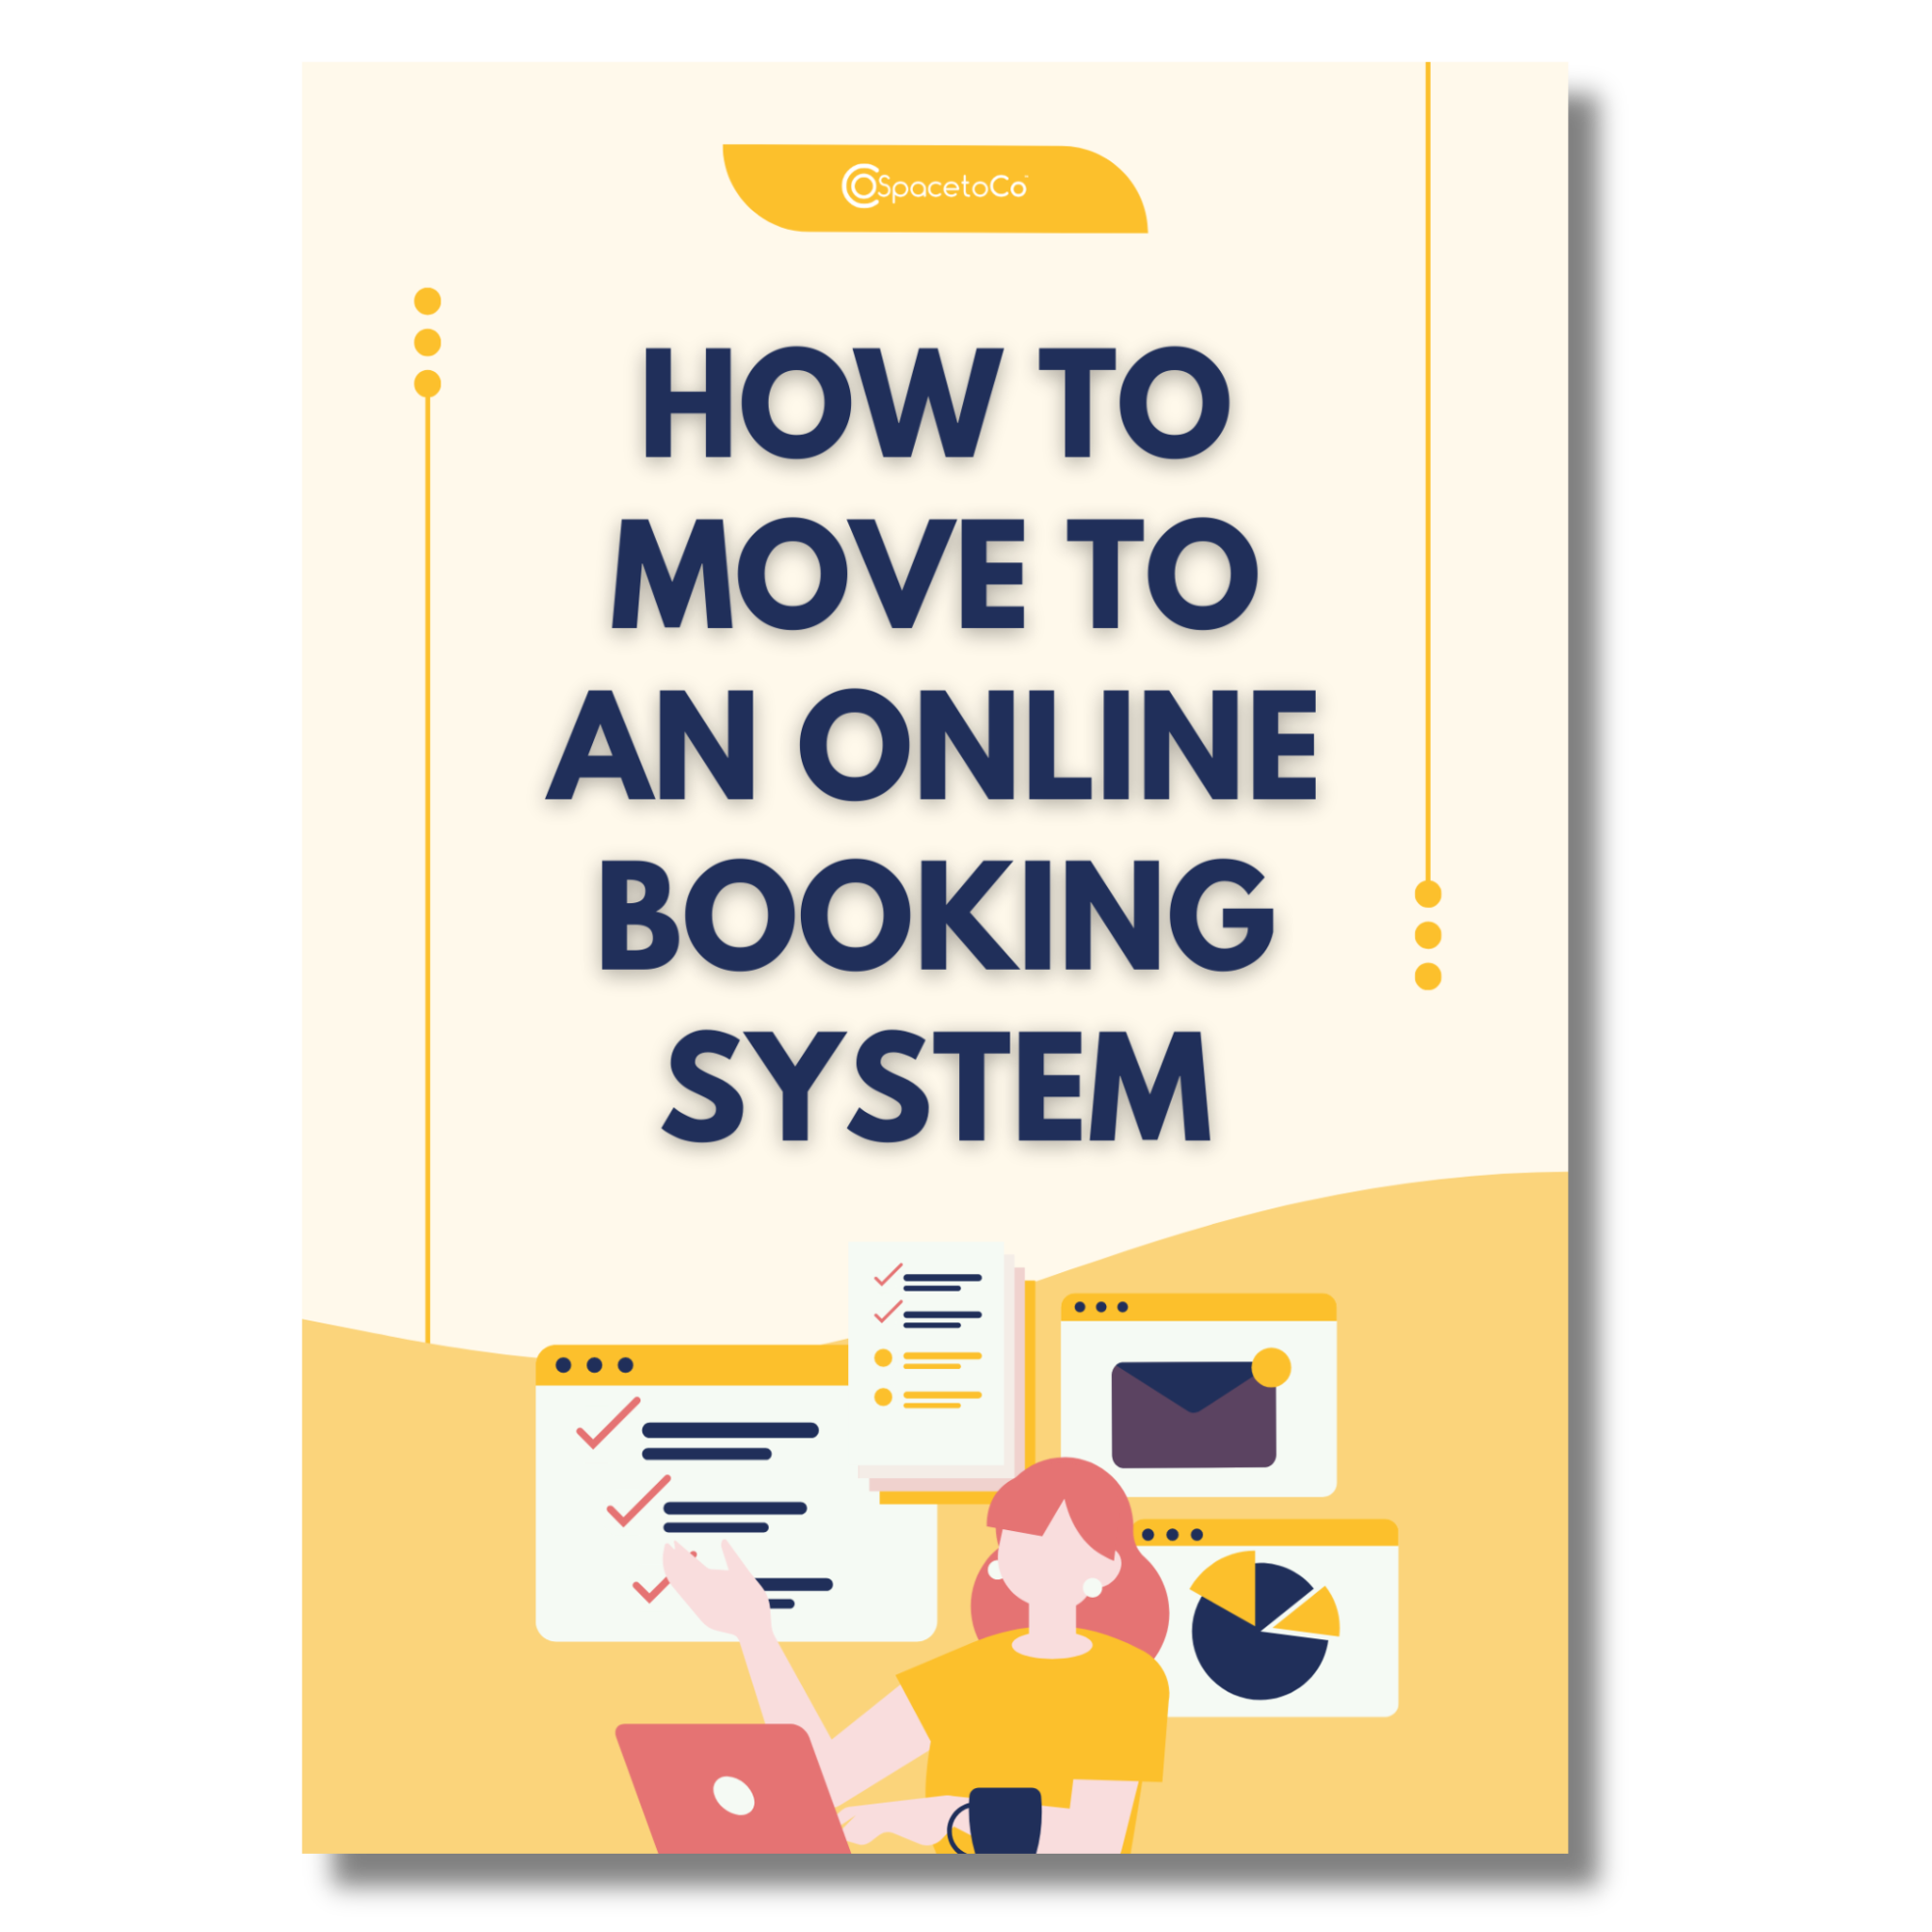 How to move to an online booking system guide cover